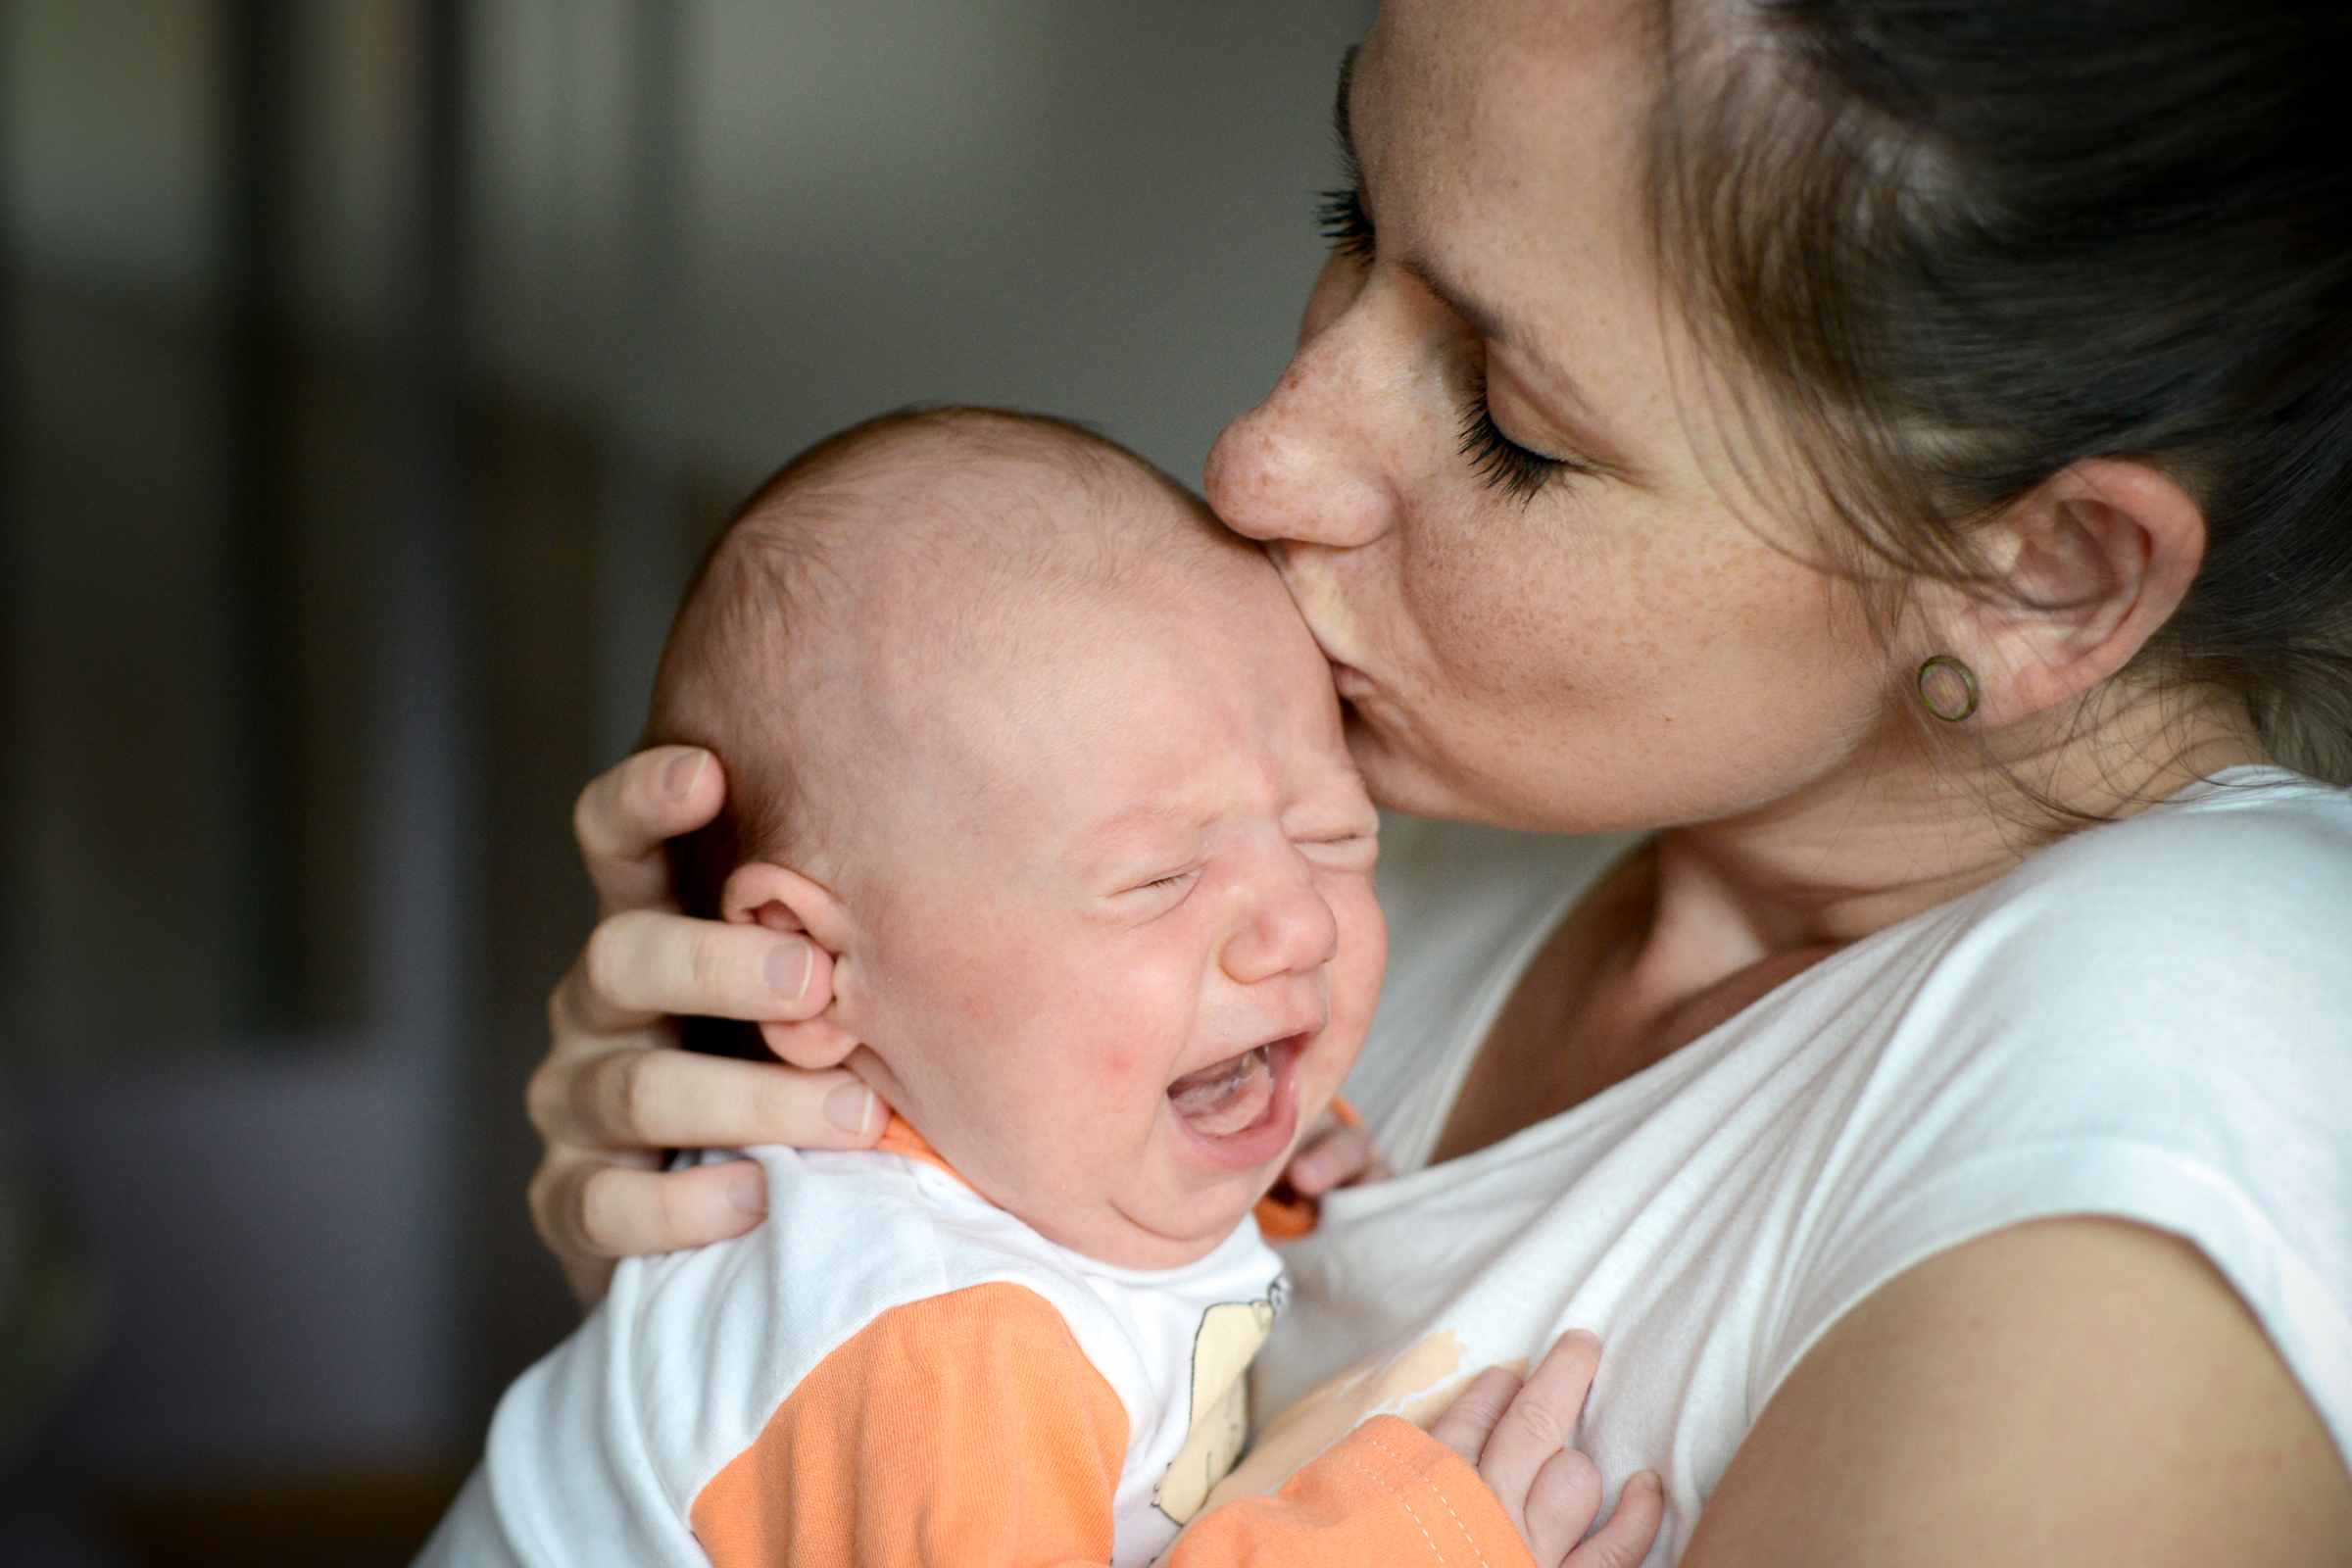 web-infant-crying-baby-mother-kiss-halfpoint-shutterstock_417498310